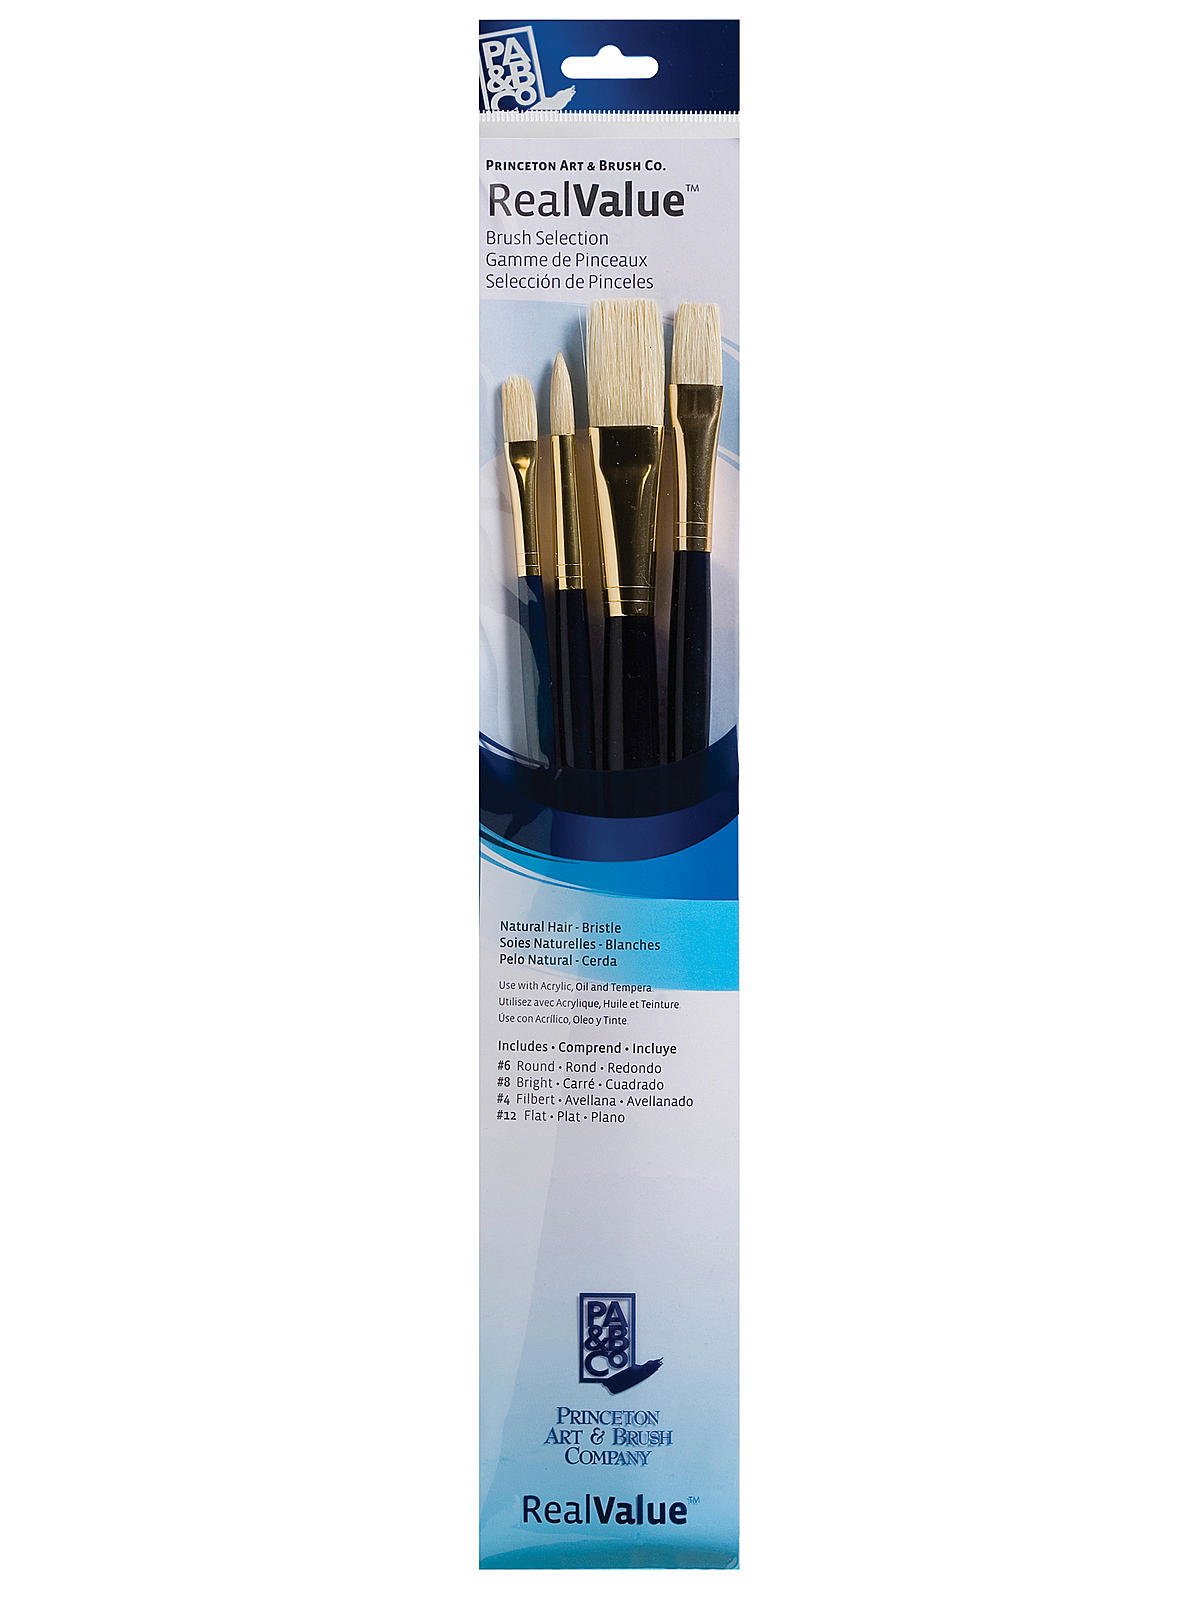 Princeton Select Value Series Set #15 - Brushes and More